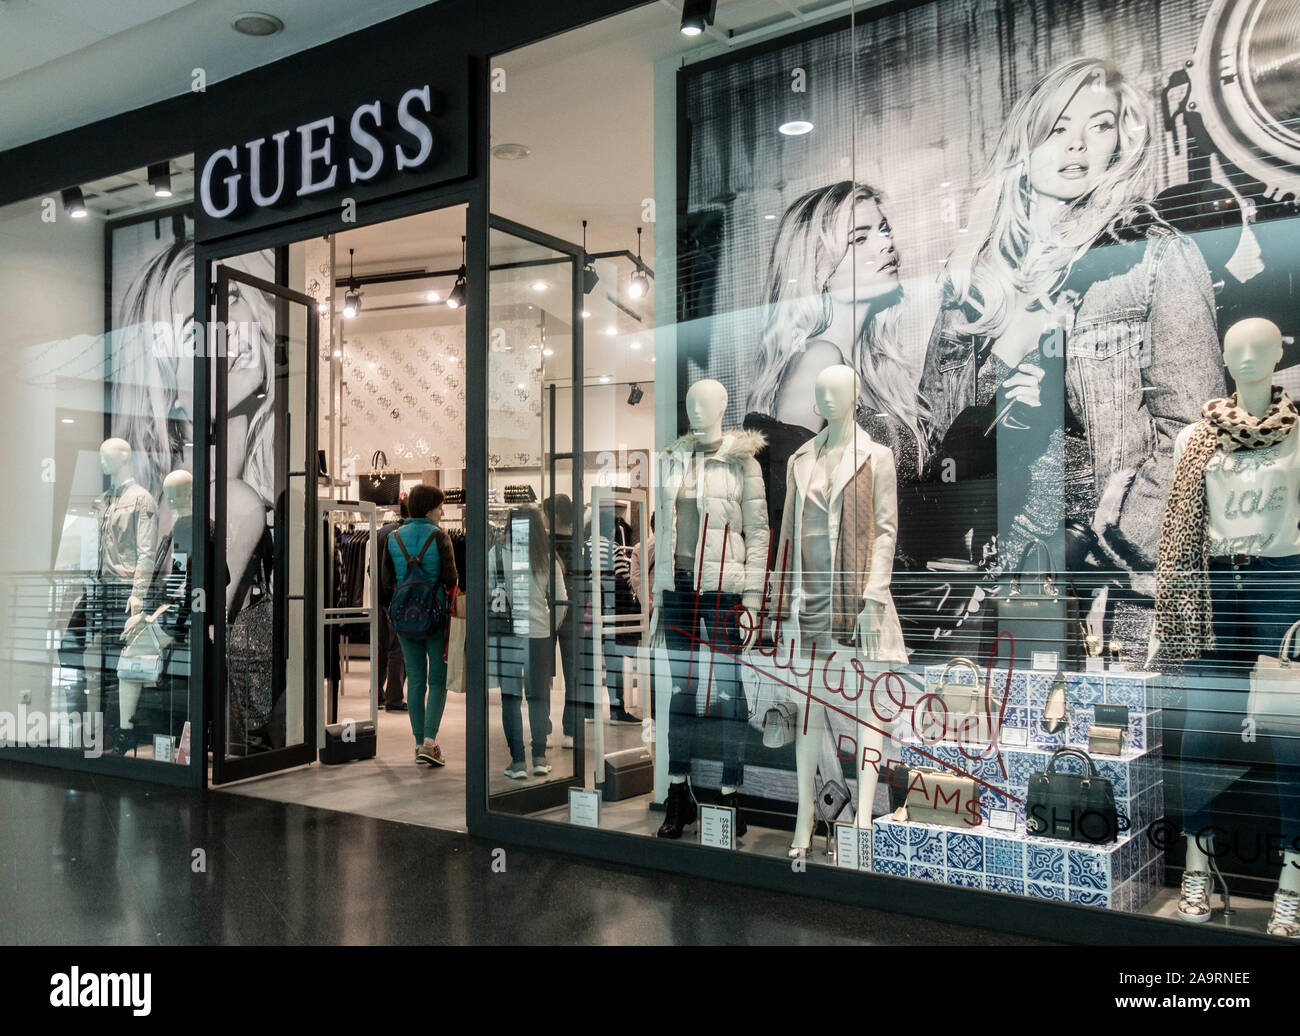 Guess clothing store in Spain Stock Photo - Alamy